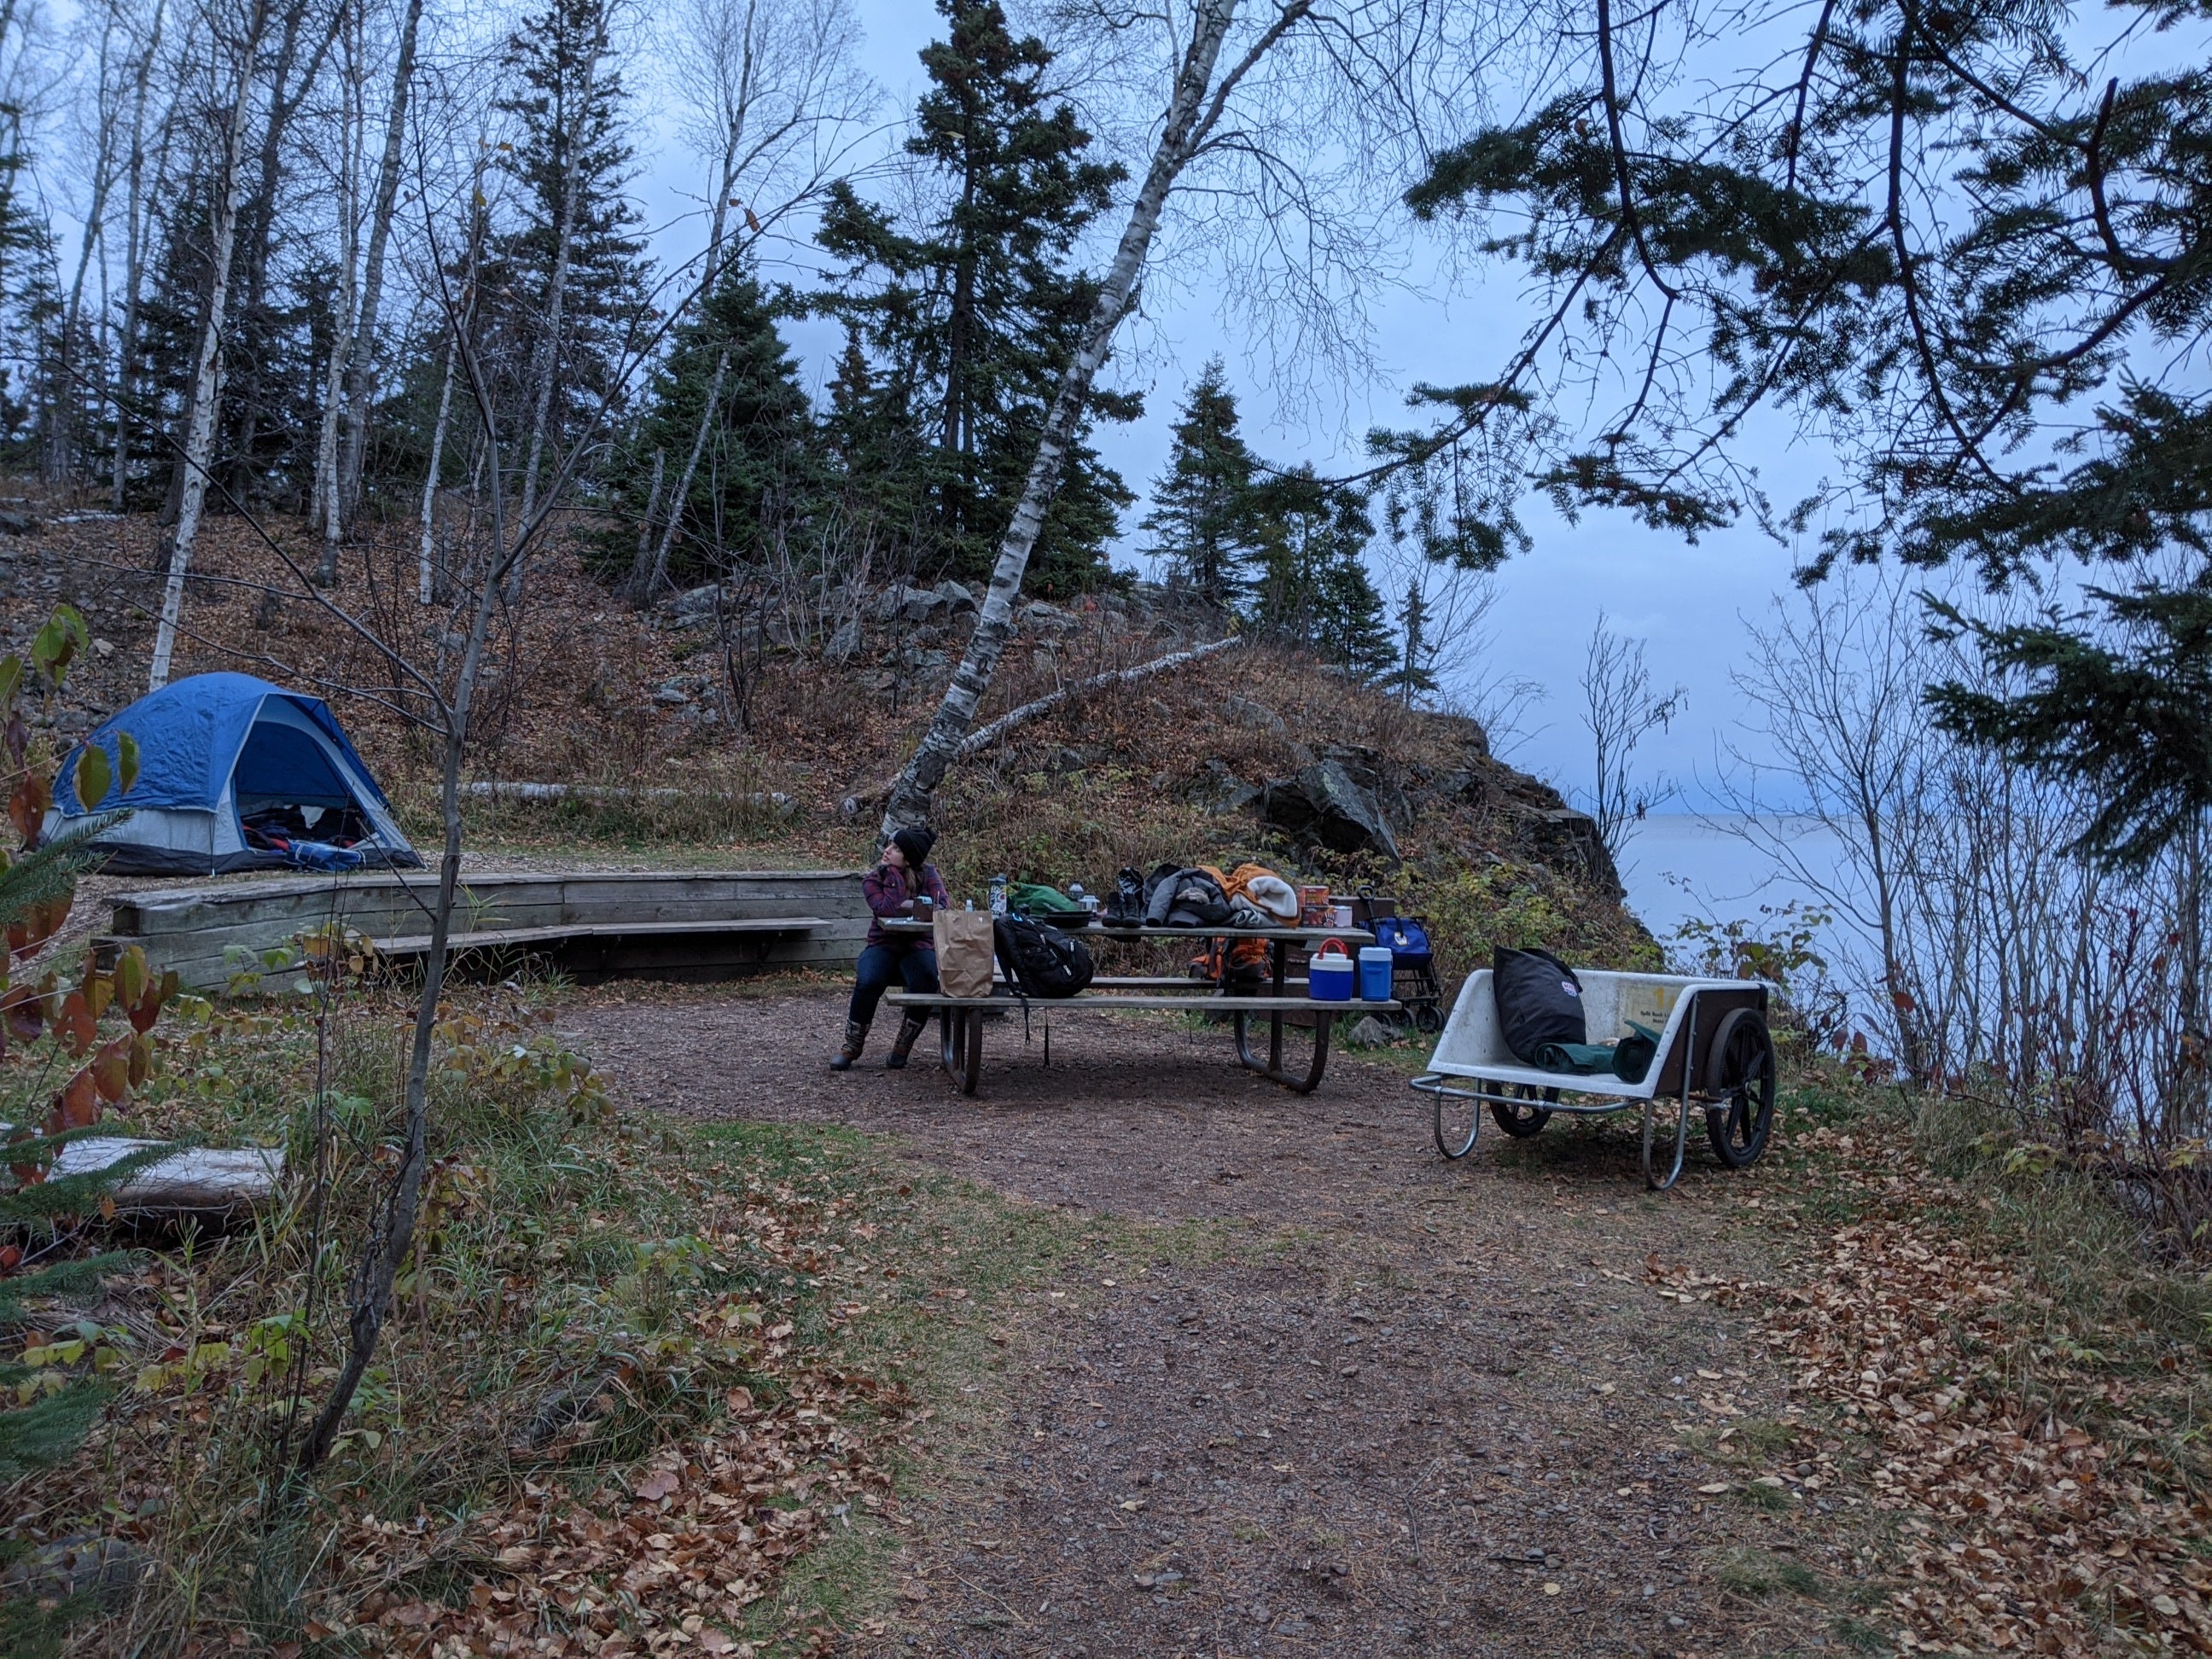 Campsite C11 taken from the main path